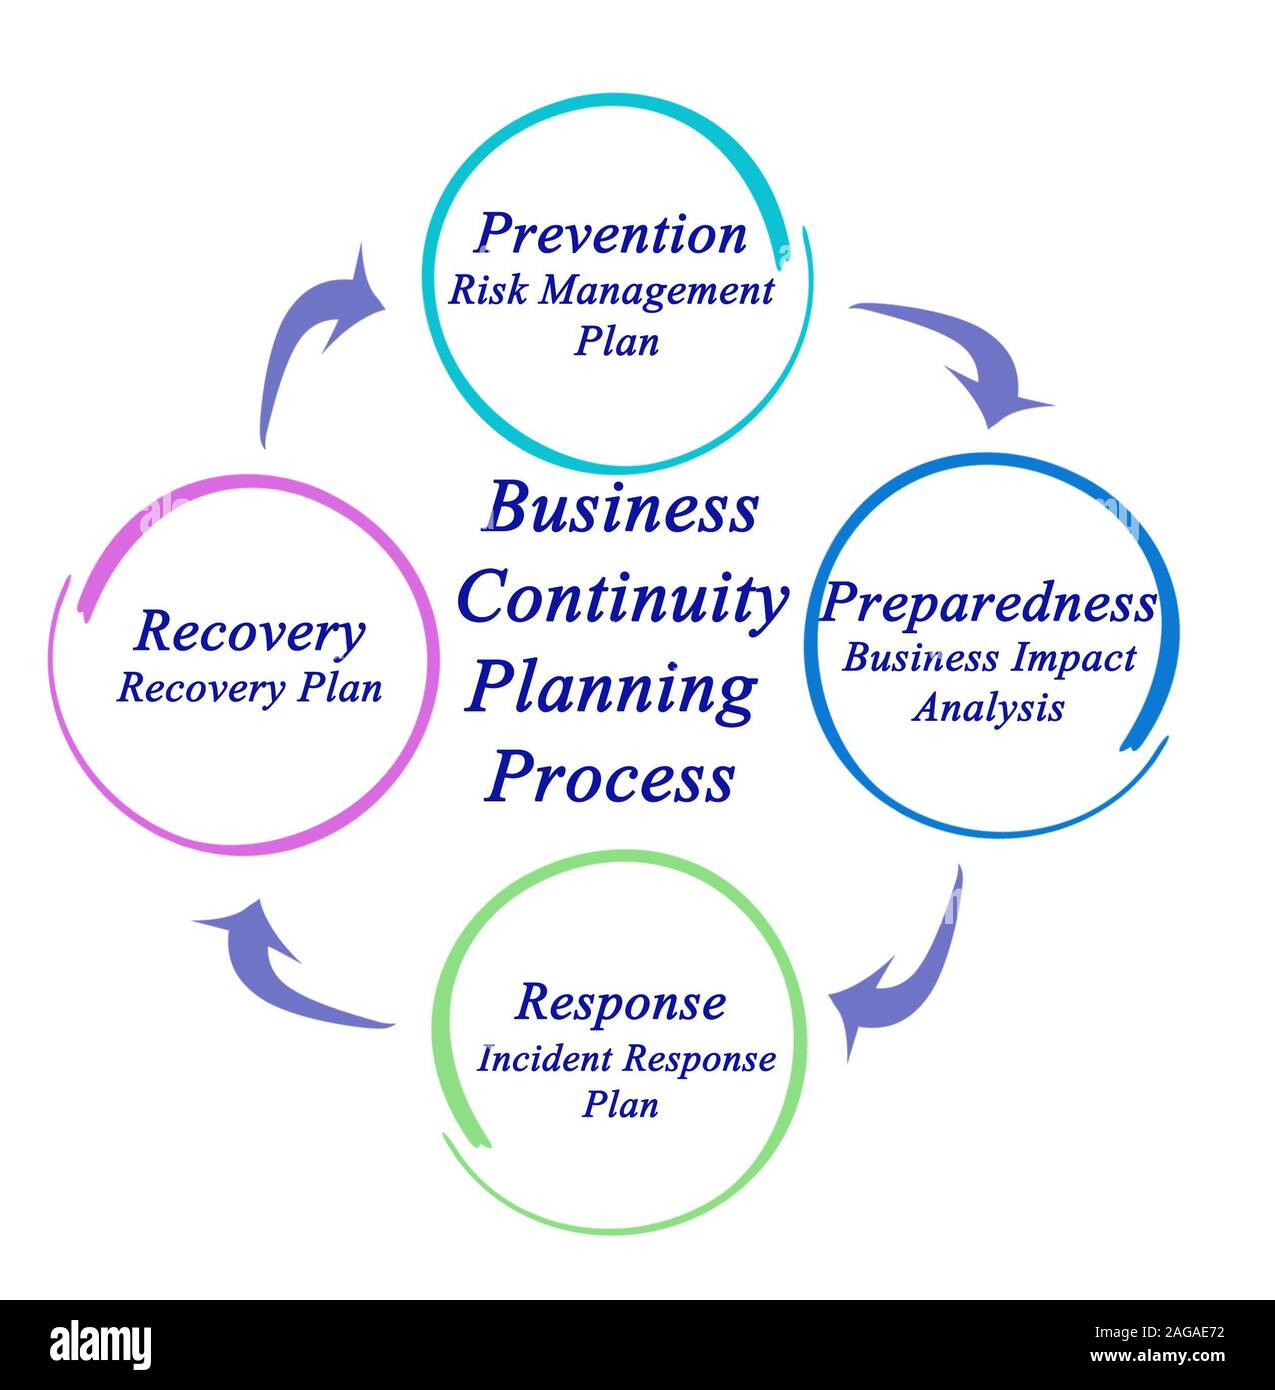 what are examples of a business continuity plan